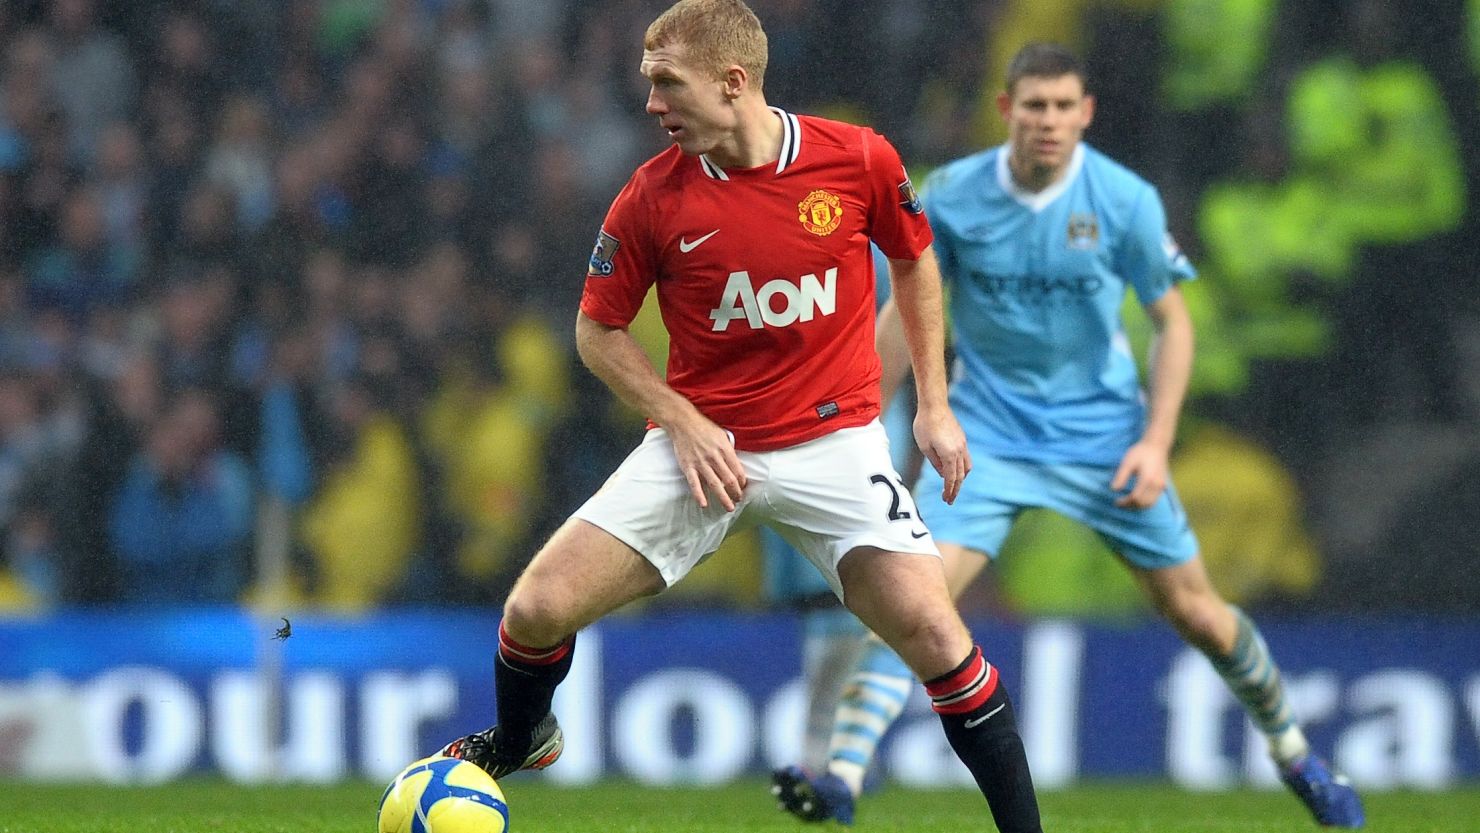 Paul Scholes controls the ball as he comes out of retirement for Man Utd in their FA Cup tie against Man City. 